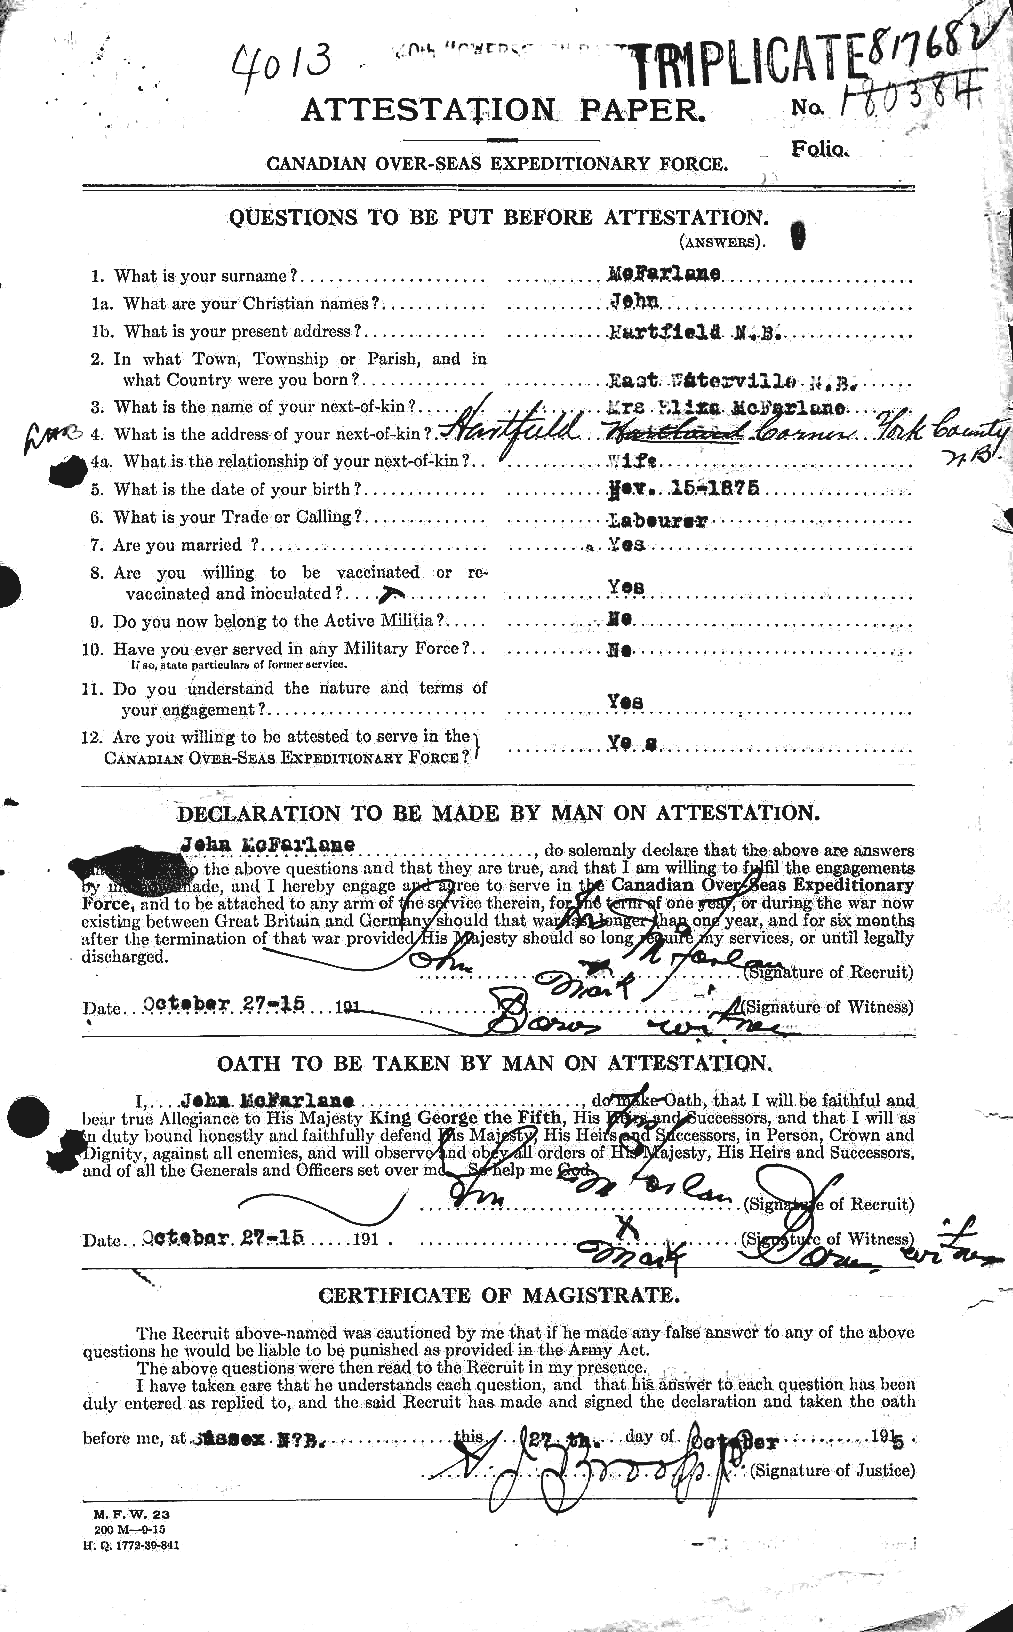 Personnel Records of the First World War - CEF 521866a